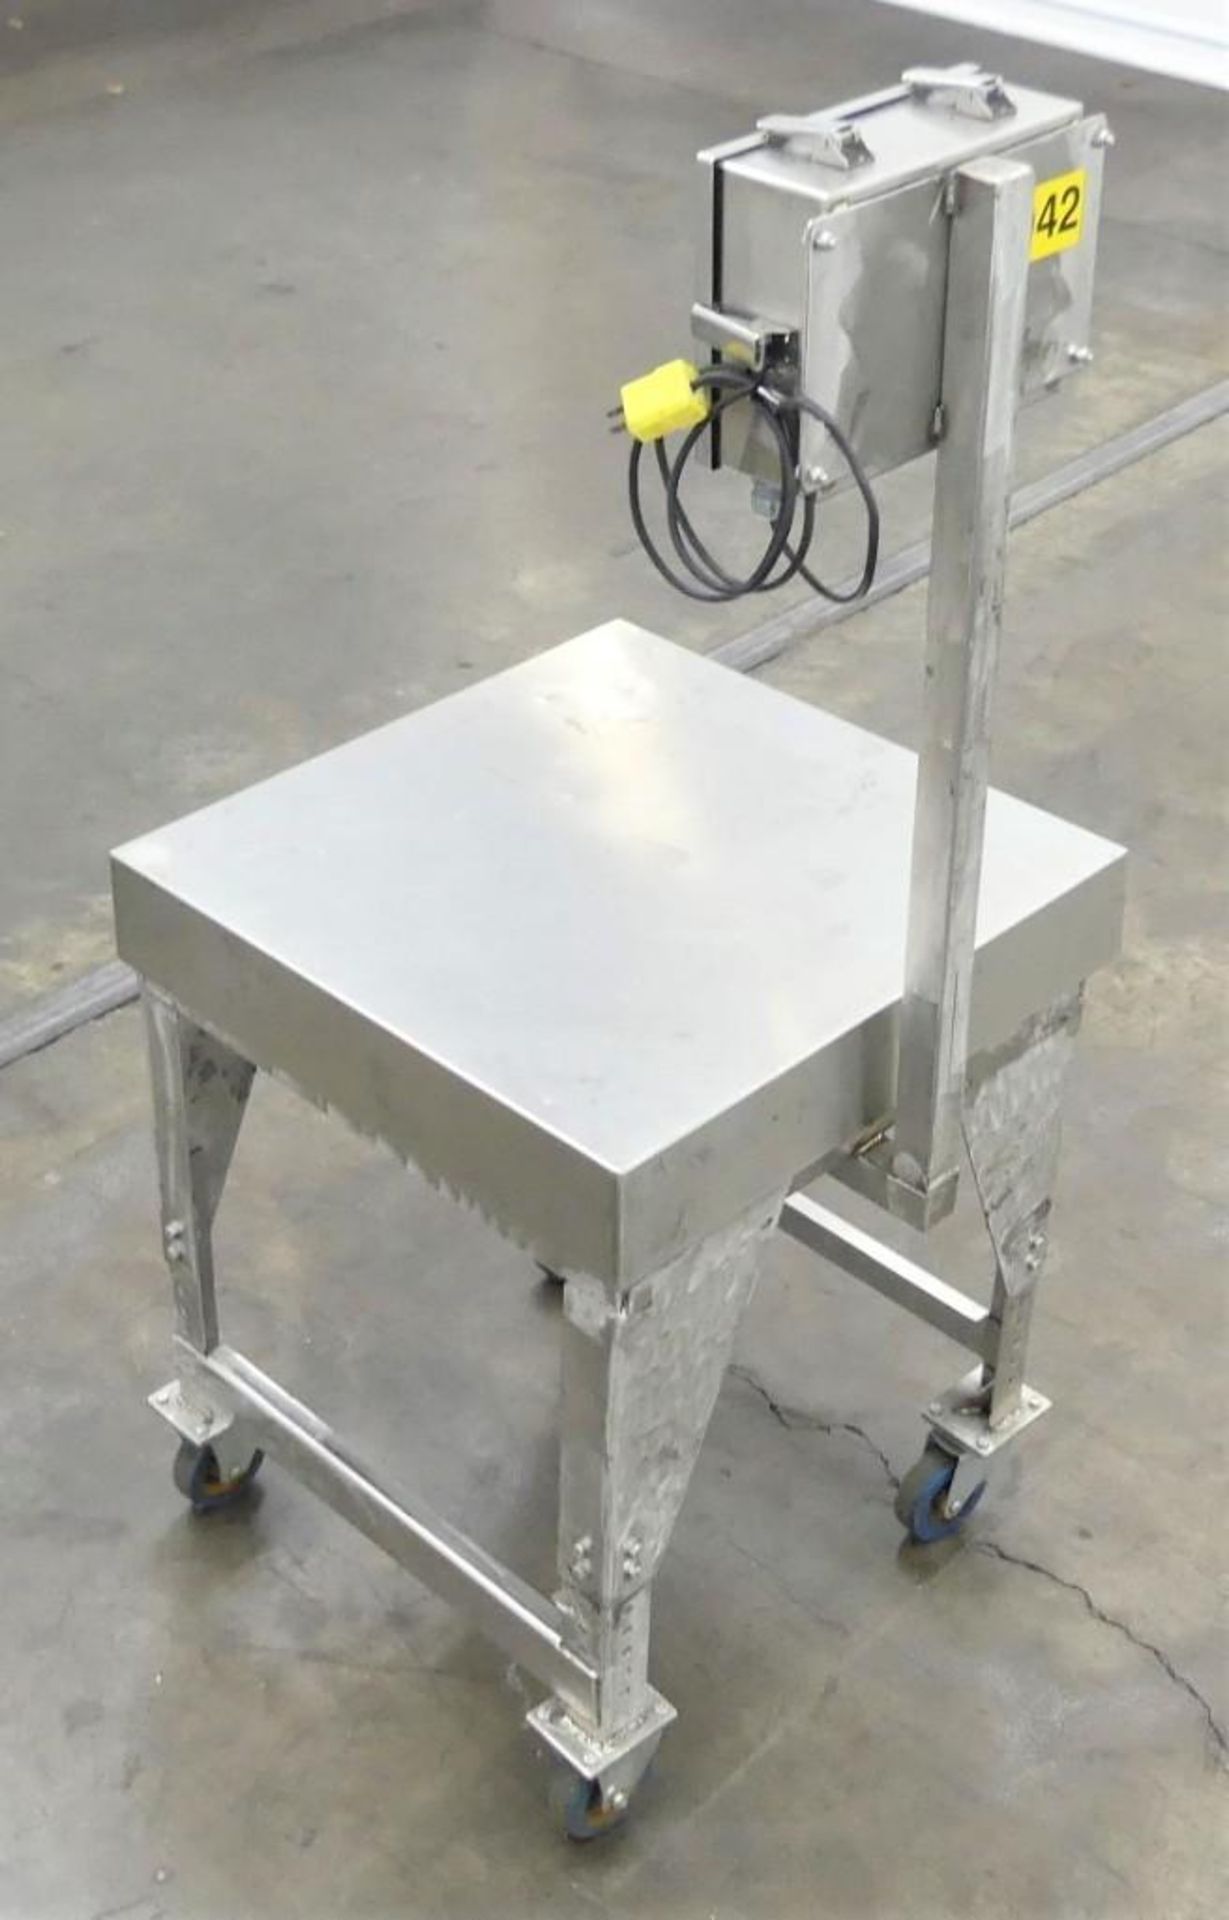 Stainless Scale w 6 Digit Western Scale Indicator - Image 2 of 5